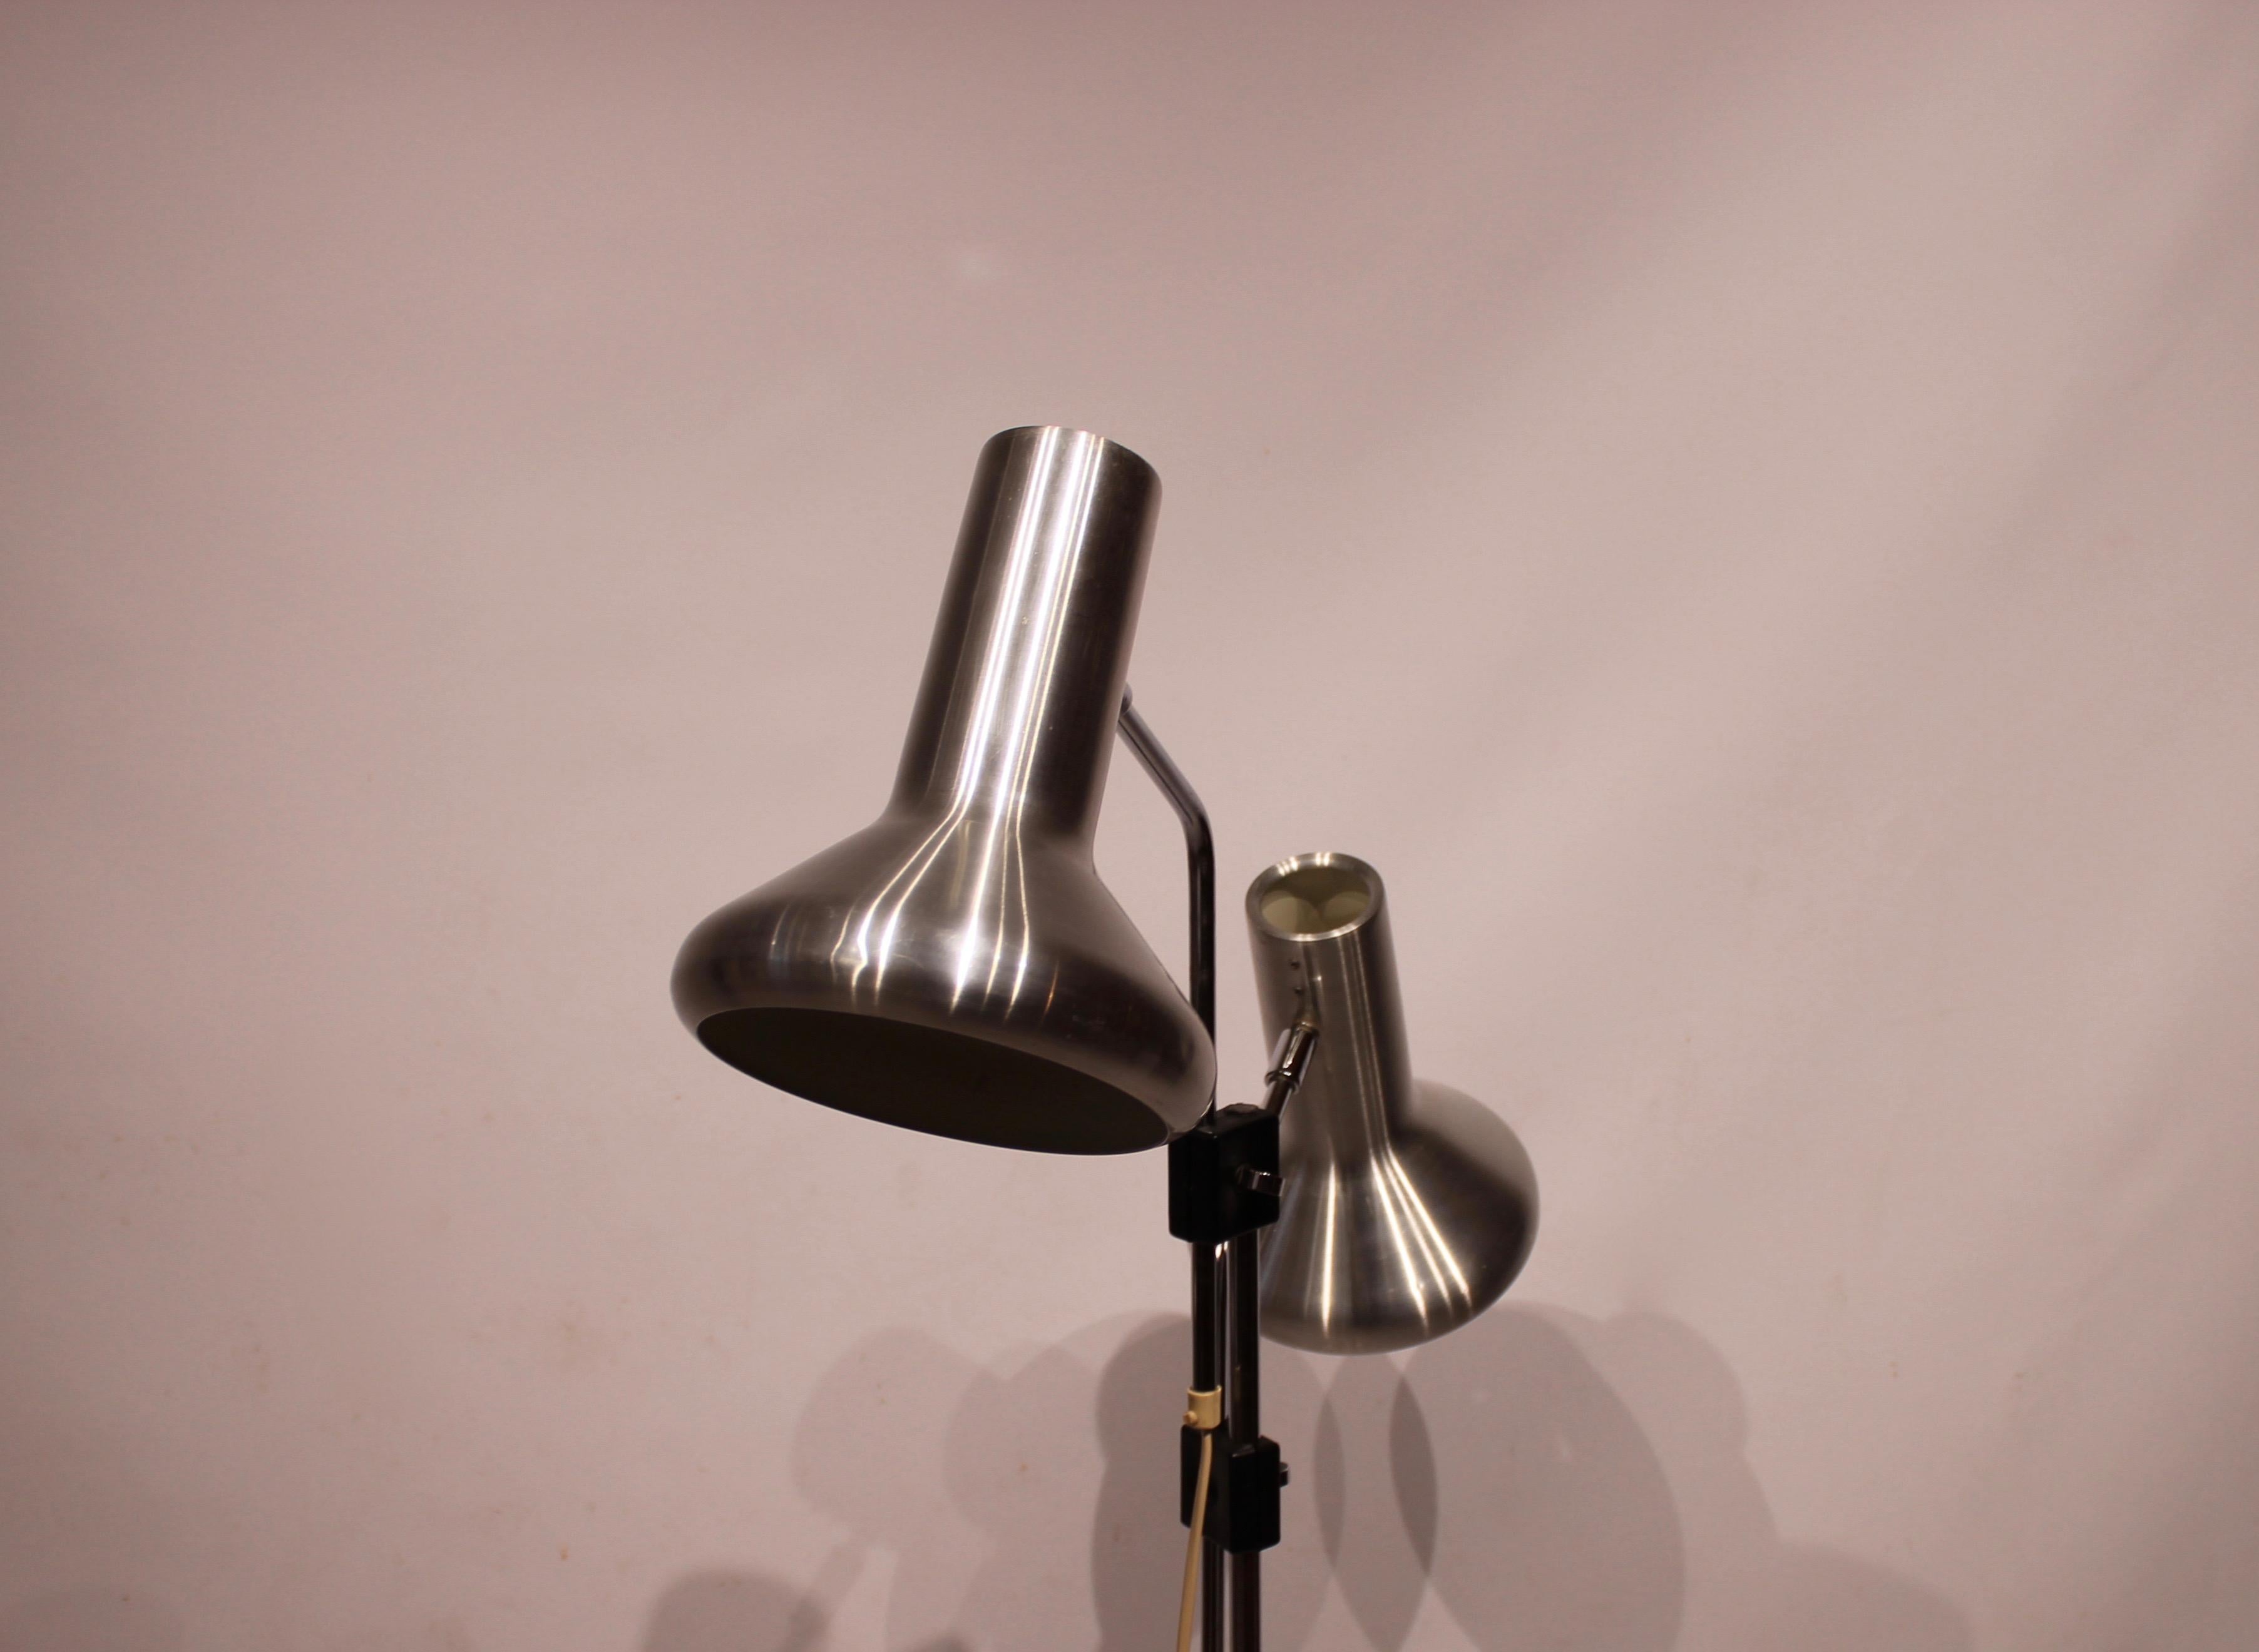 Mid-20th Century Floor Lamp Made In Steel, Danish Design From 1960s For Sale